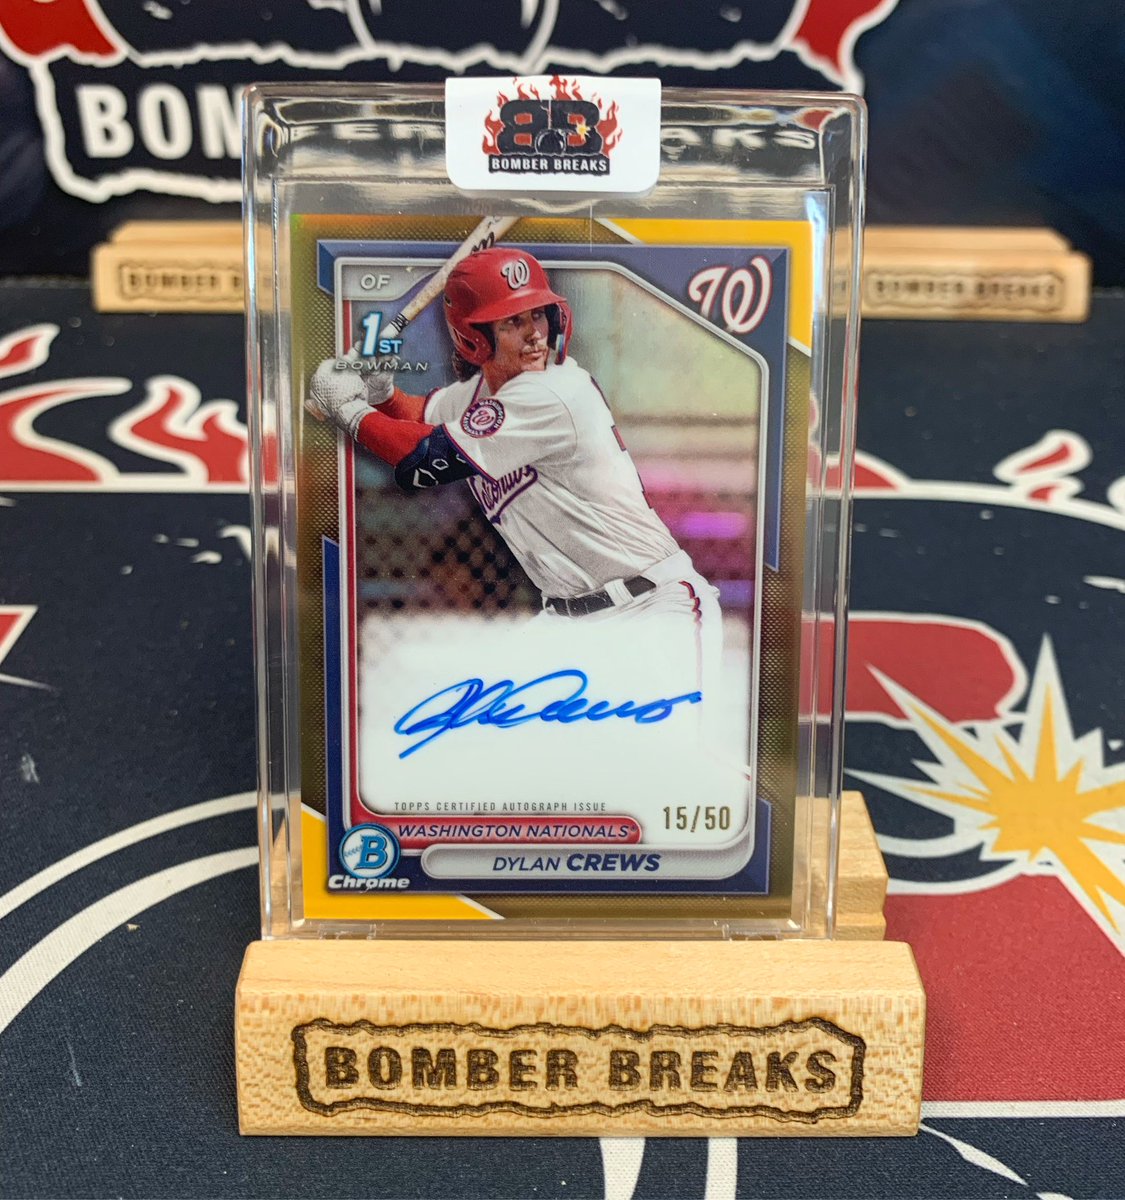 Another Dylan Crews /50 Gold Refractor 1st Bowman Chrome Auto pulled on the Break Pad today! 🔥🔥 @topps @fanatics #baseballcards #washingtonnationals #nationals #groupbreaks #thehobby #boxbreaks #casebreaks #mlb #bowman #bowmanchrome #autograph #collect #bowmanbaseball